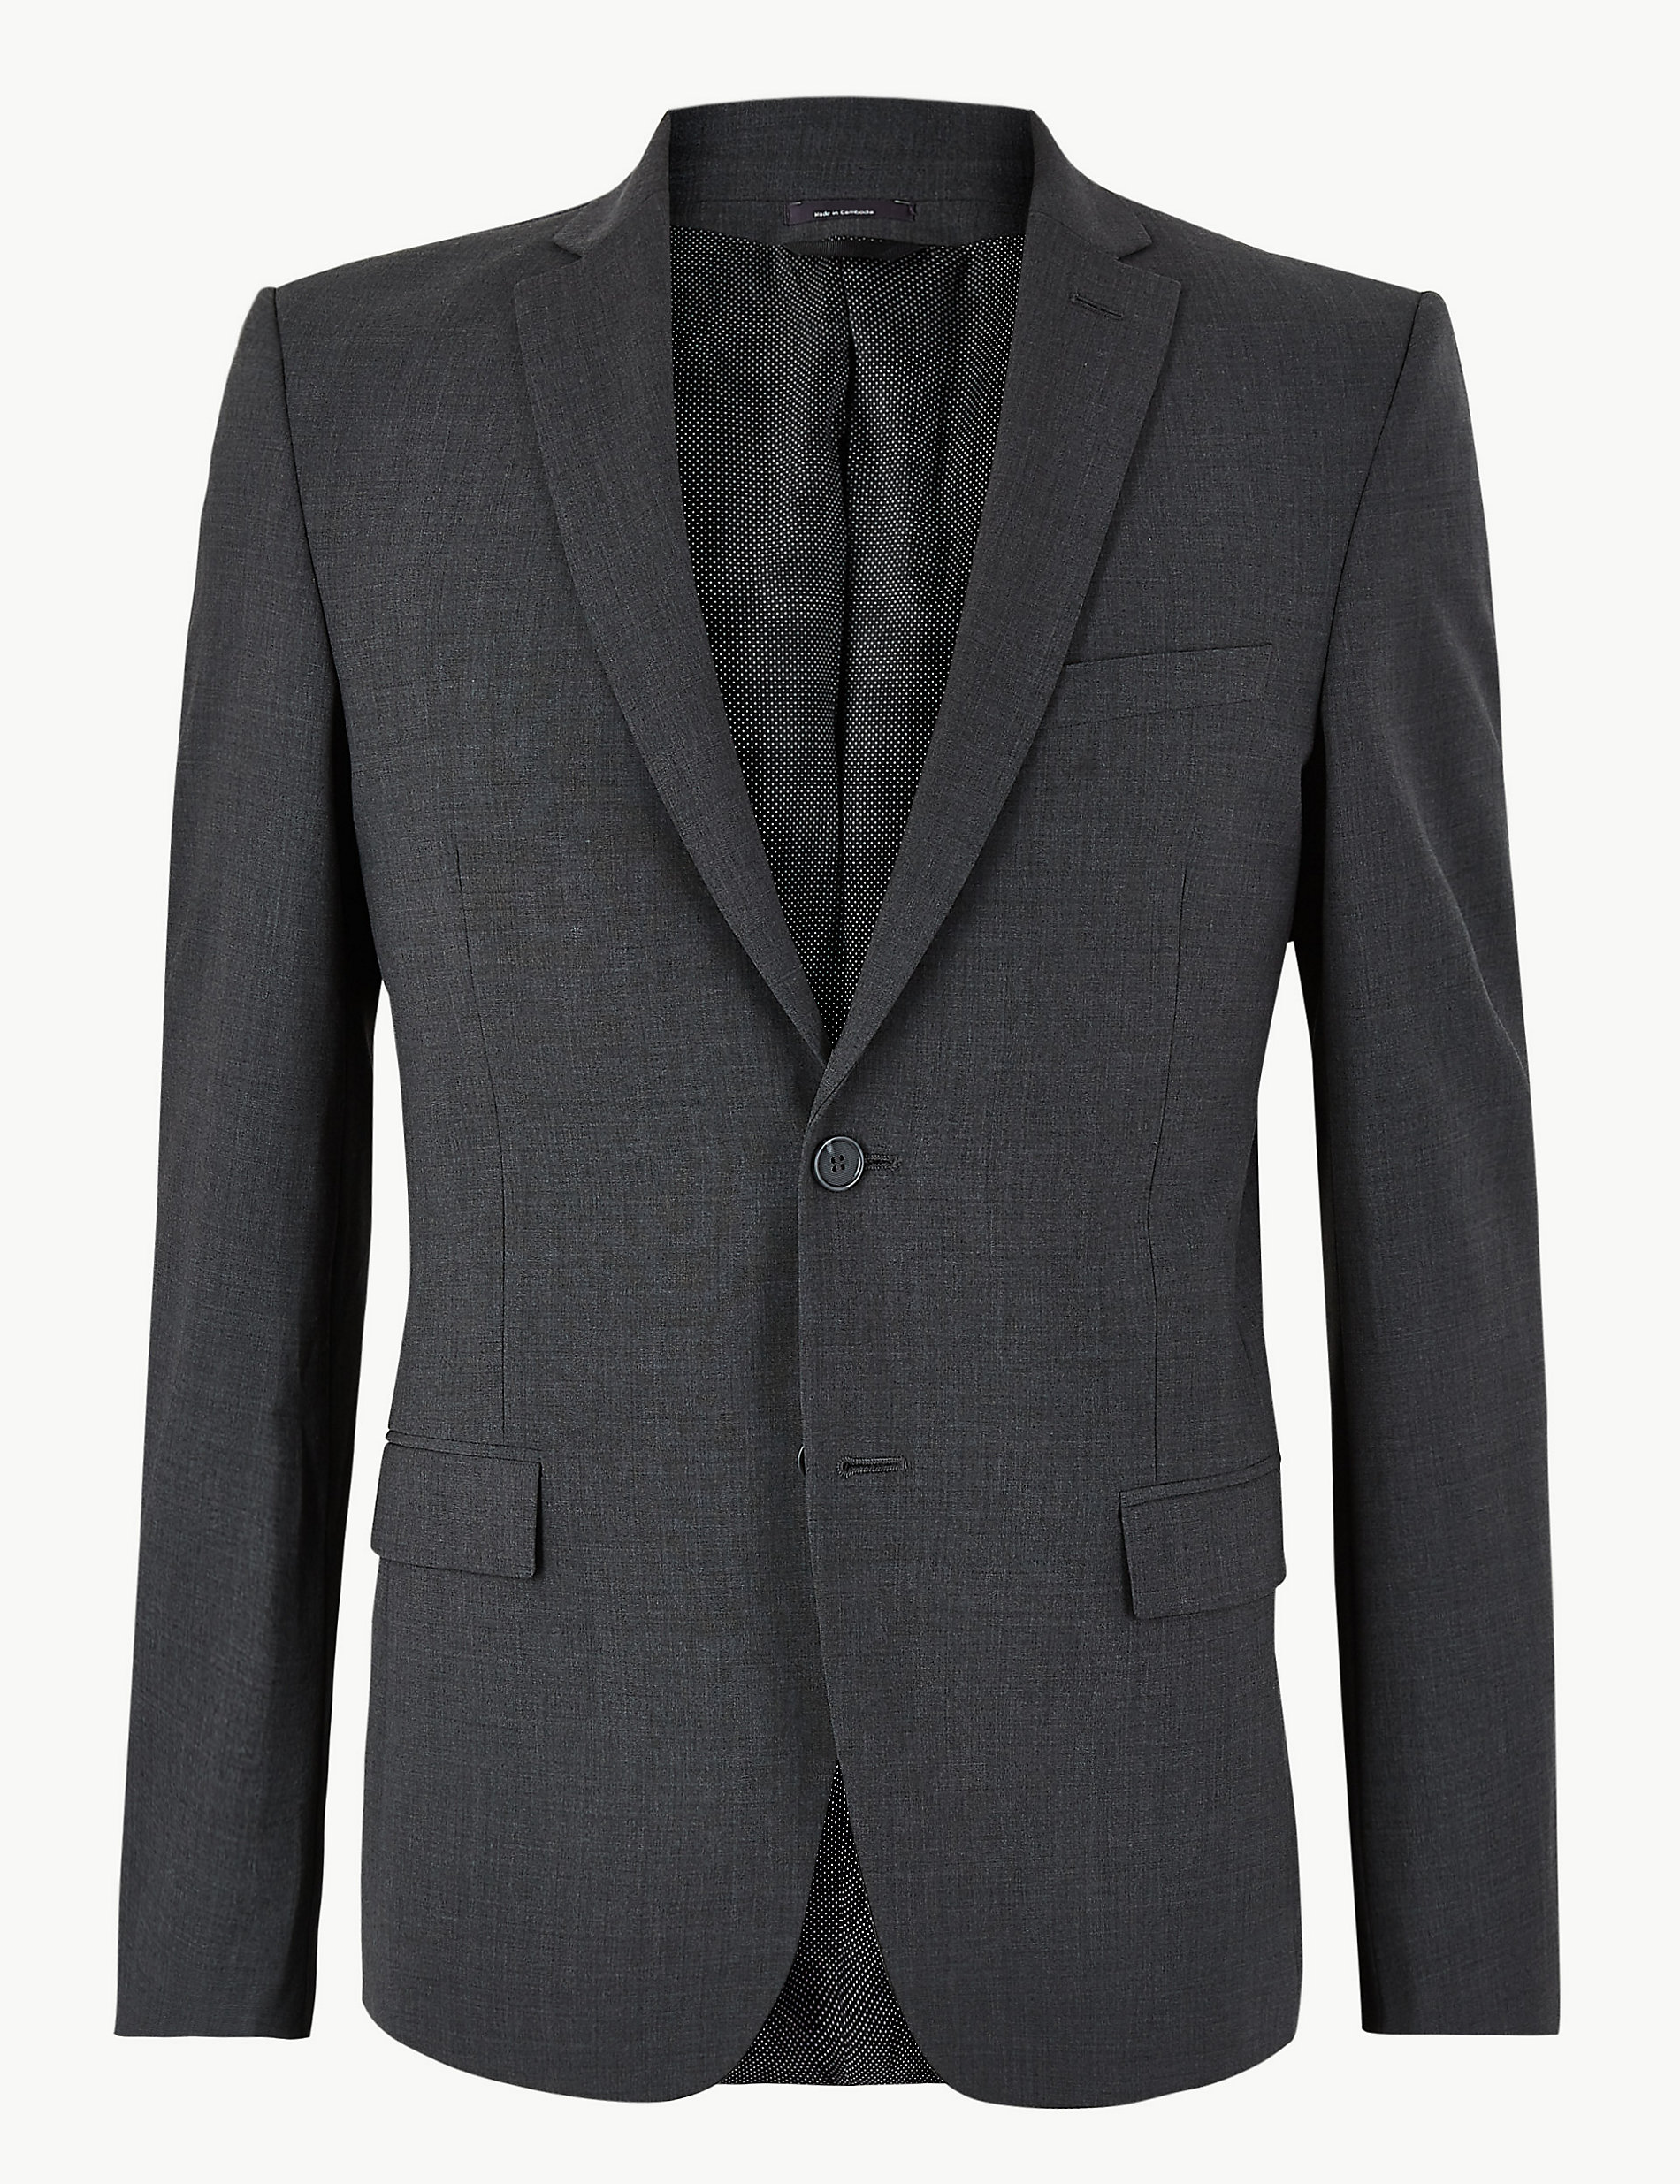 The Ultimate Charcoal Slim Fit Jacket